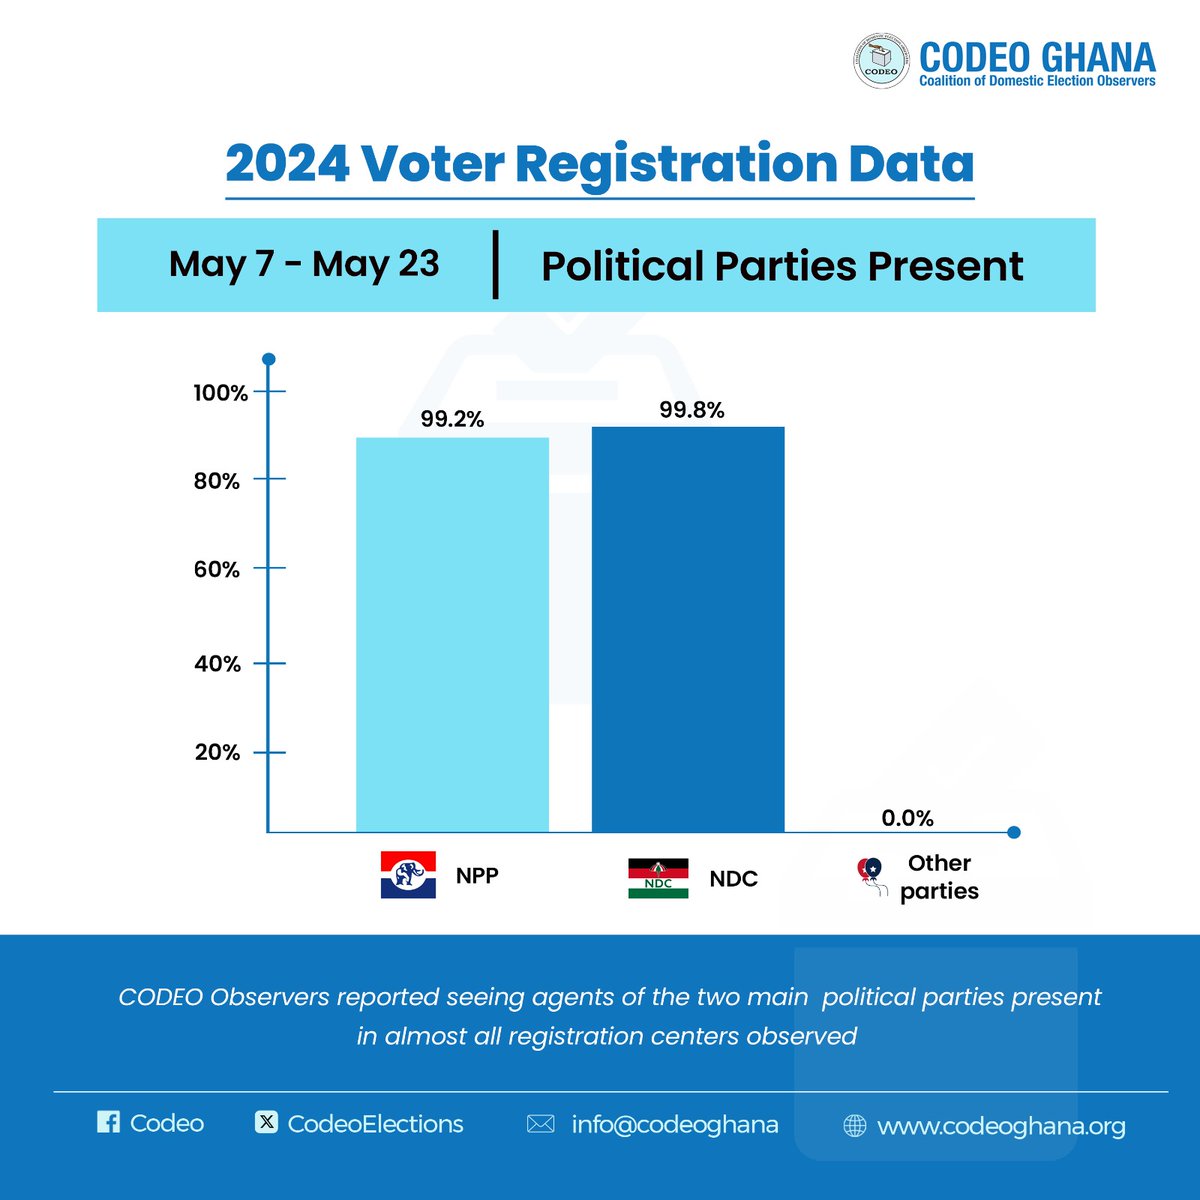 #BVRUpdate: A majority (87%) of registration kits functioned well, while 13% experienced issues. Additionally, our observers reported the presence of agents for both major political parties at the various registration centers. #VoterRegistration #GhanaElections